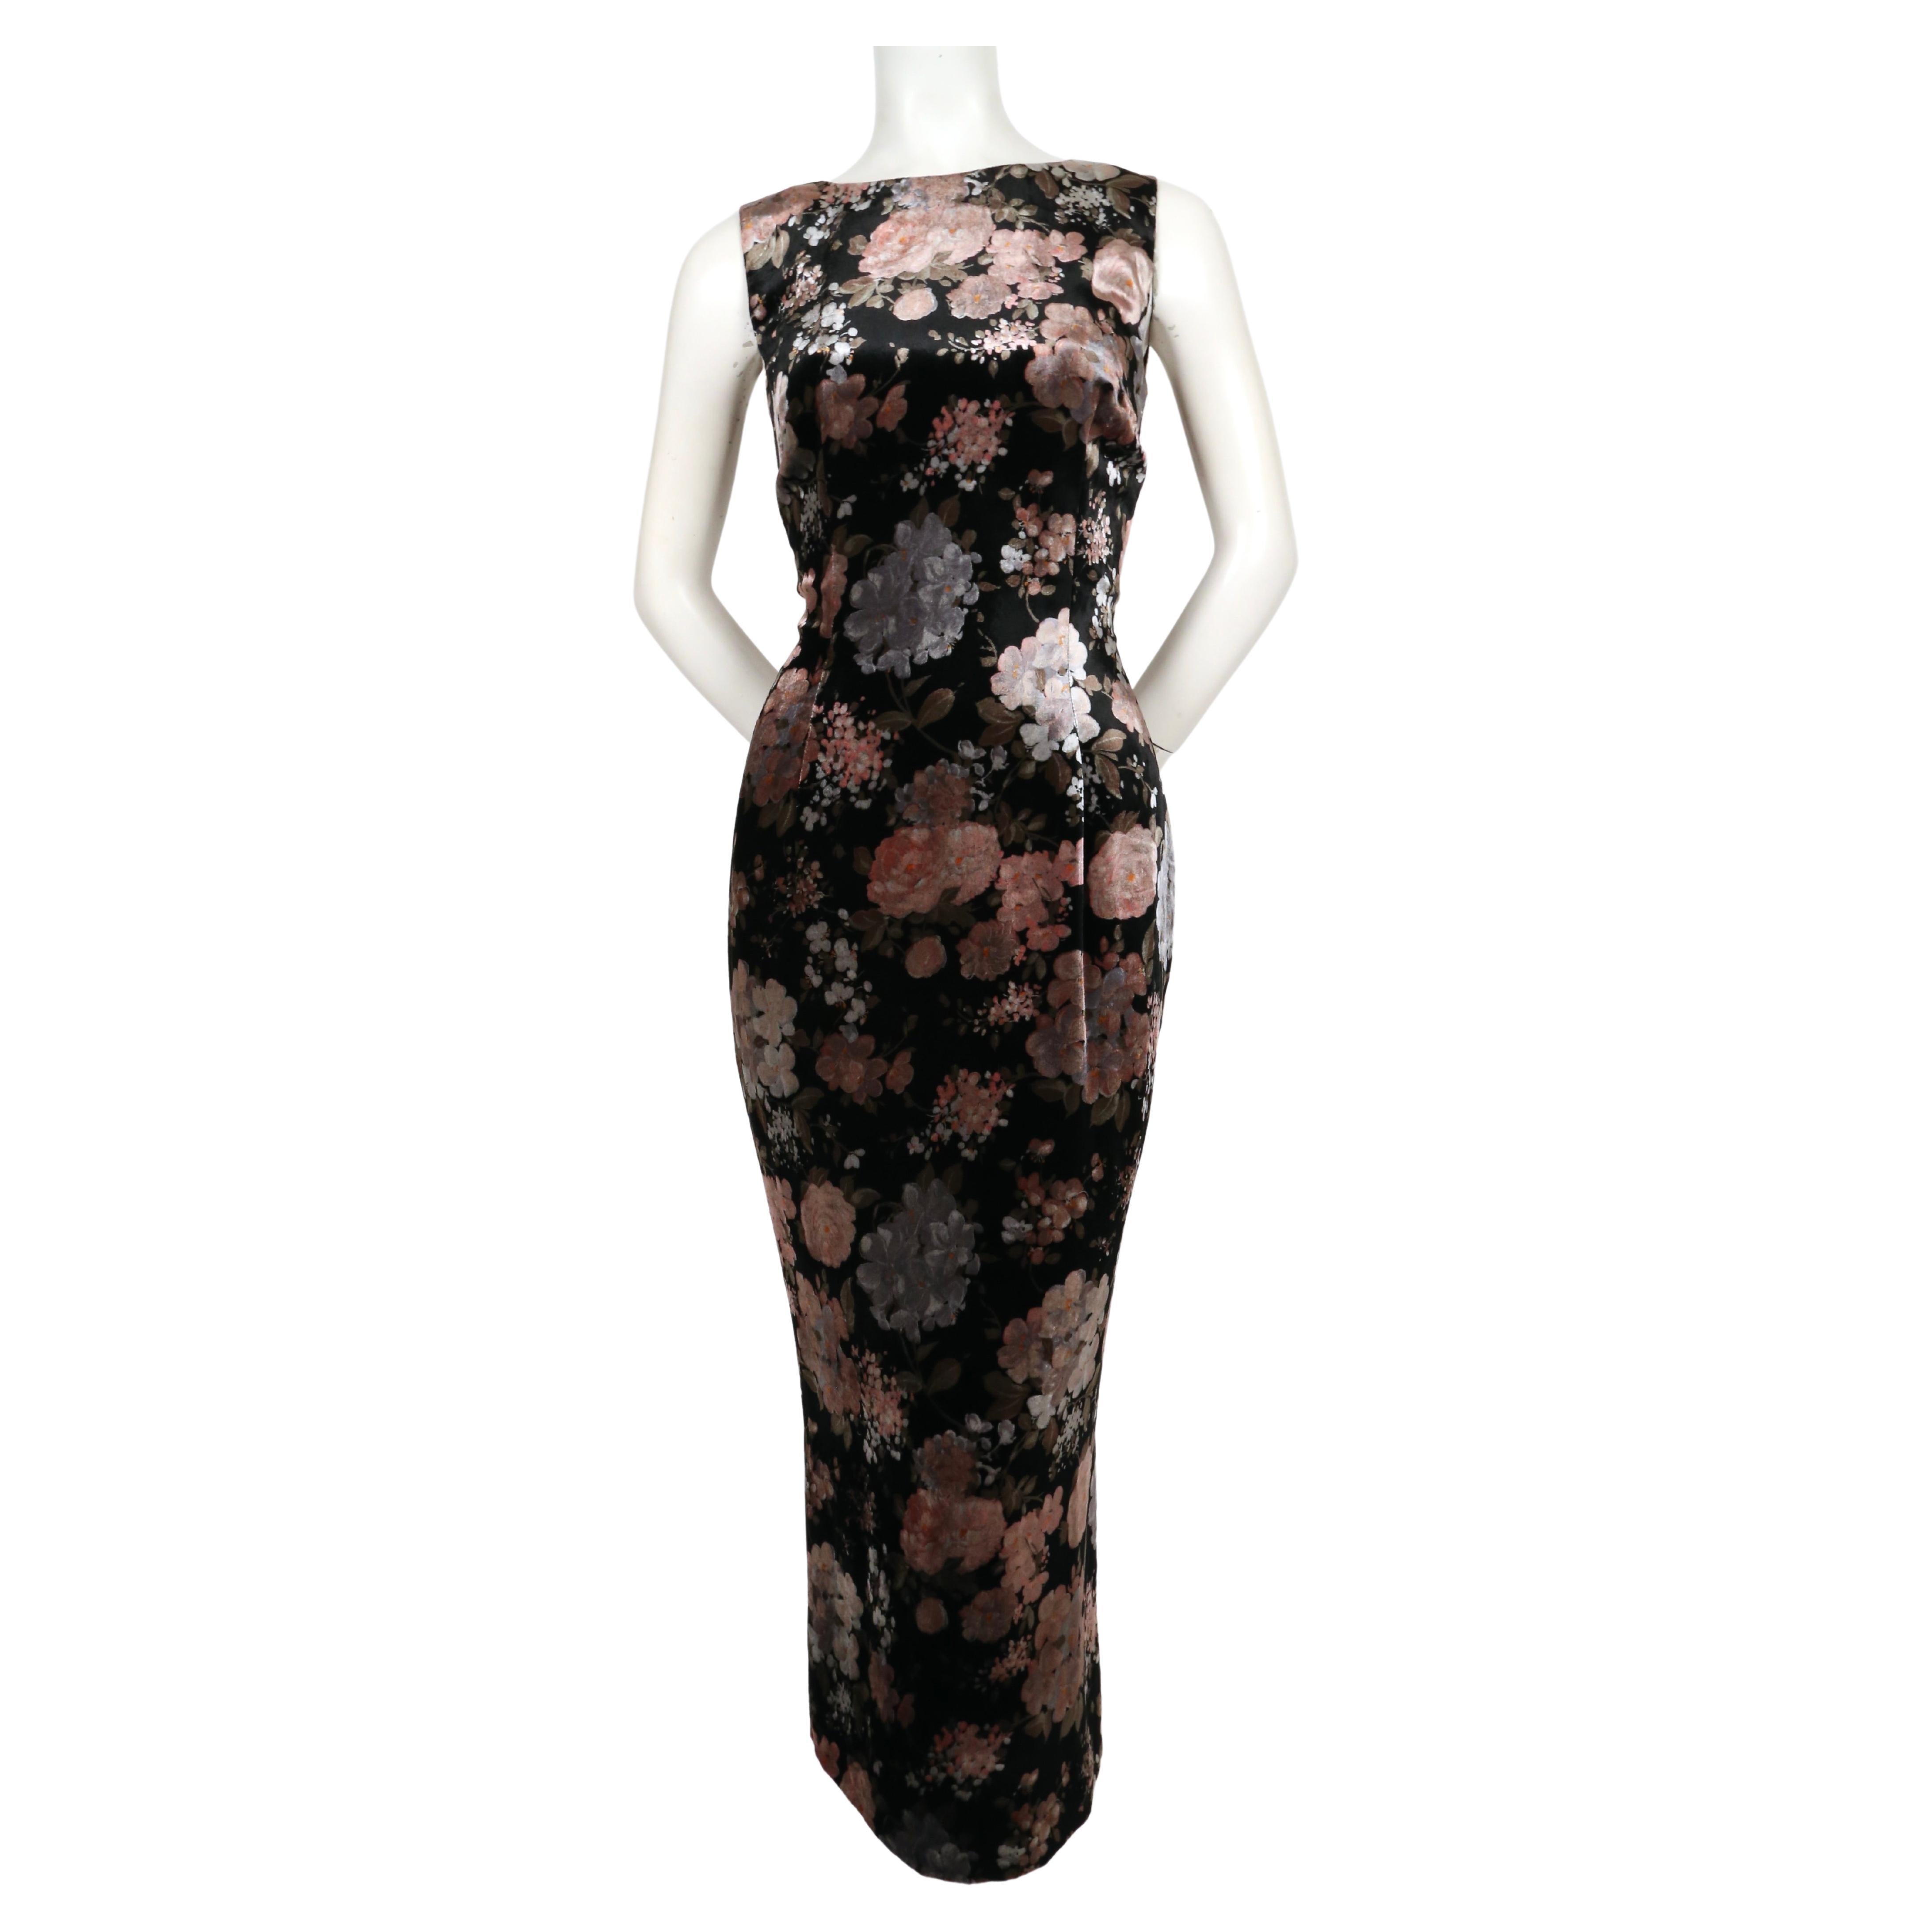 Long, floral velvet dress from Dolce & Gabbana dating to fall of 1996. Colors have a slightly metallic sheen to them. Dress has a very flattering figure hugging fit with a deep V at back and slit at center back hem. Italian size 42. Approximate